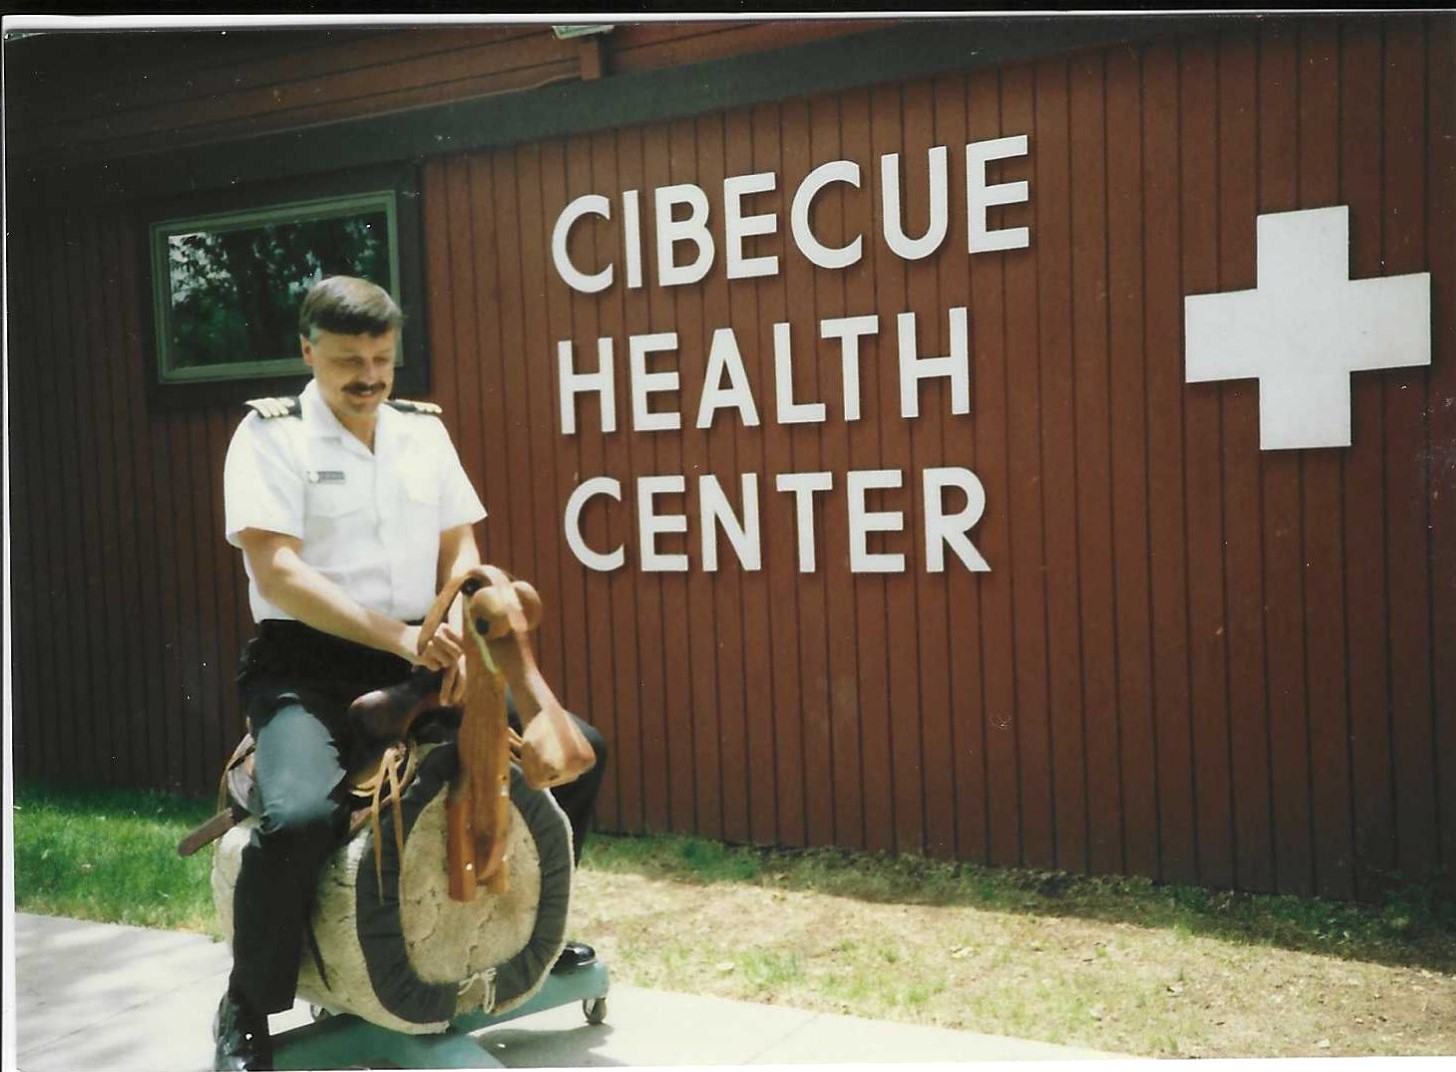 Captain Thomas Blumenberg (BS ’74) in his uniform on a rocking horse outside of Cibecue Health Center.